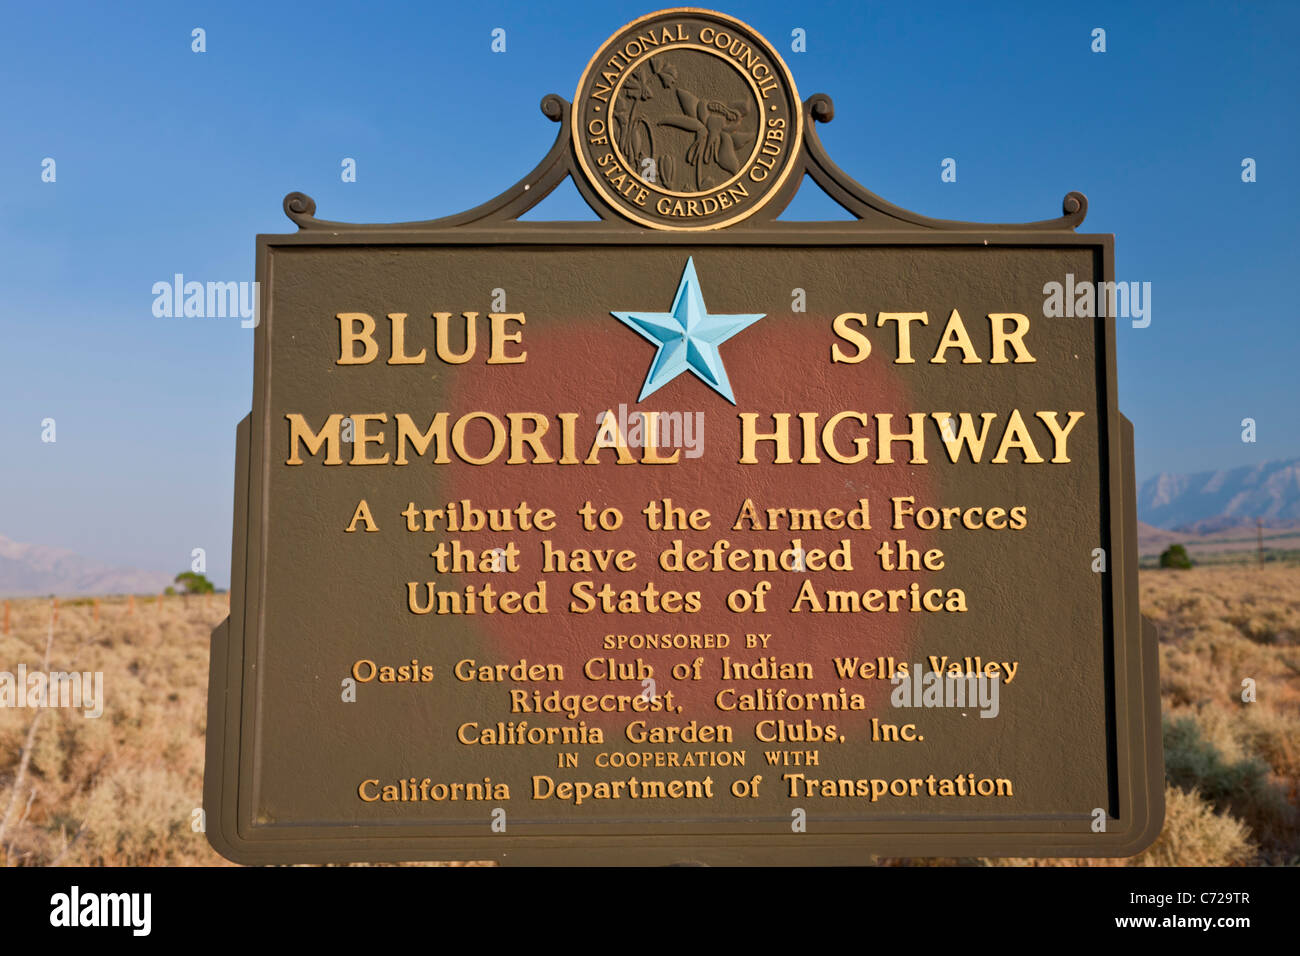 Blue Star Memorial Highway tribute to armed forces at Manzanar War Relocation Center, Independence, California, USA. JMH5304 Stock Photo